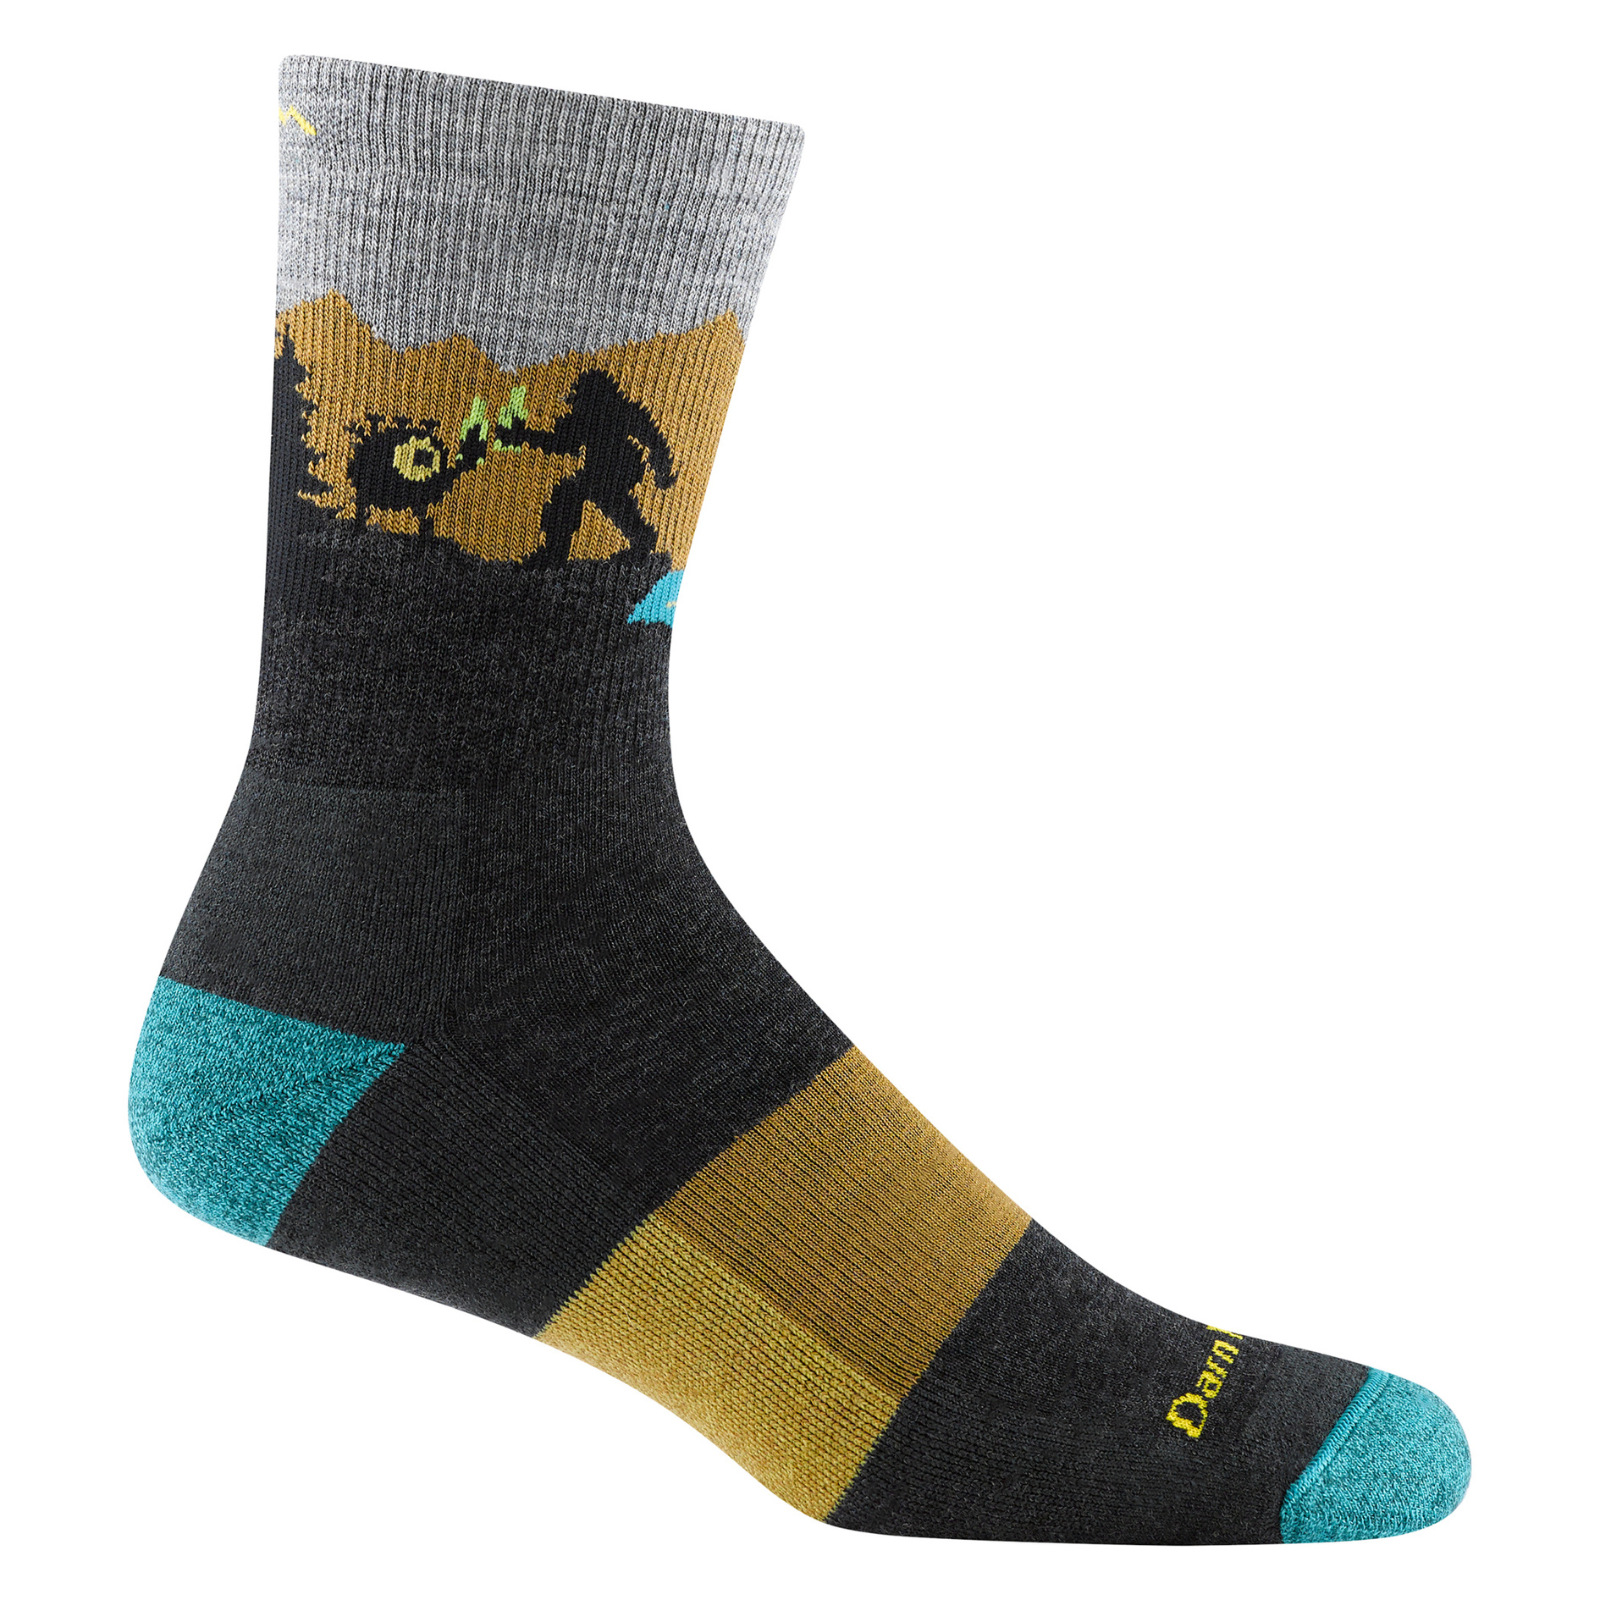 Darn Tough 5014 Close Encounters Hiker Micro Crew Midweight with Cushion Men's Sock featuring gray sock with Big Foot, an alien, and the Loch Ness Monster in the woods shown on a display foot